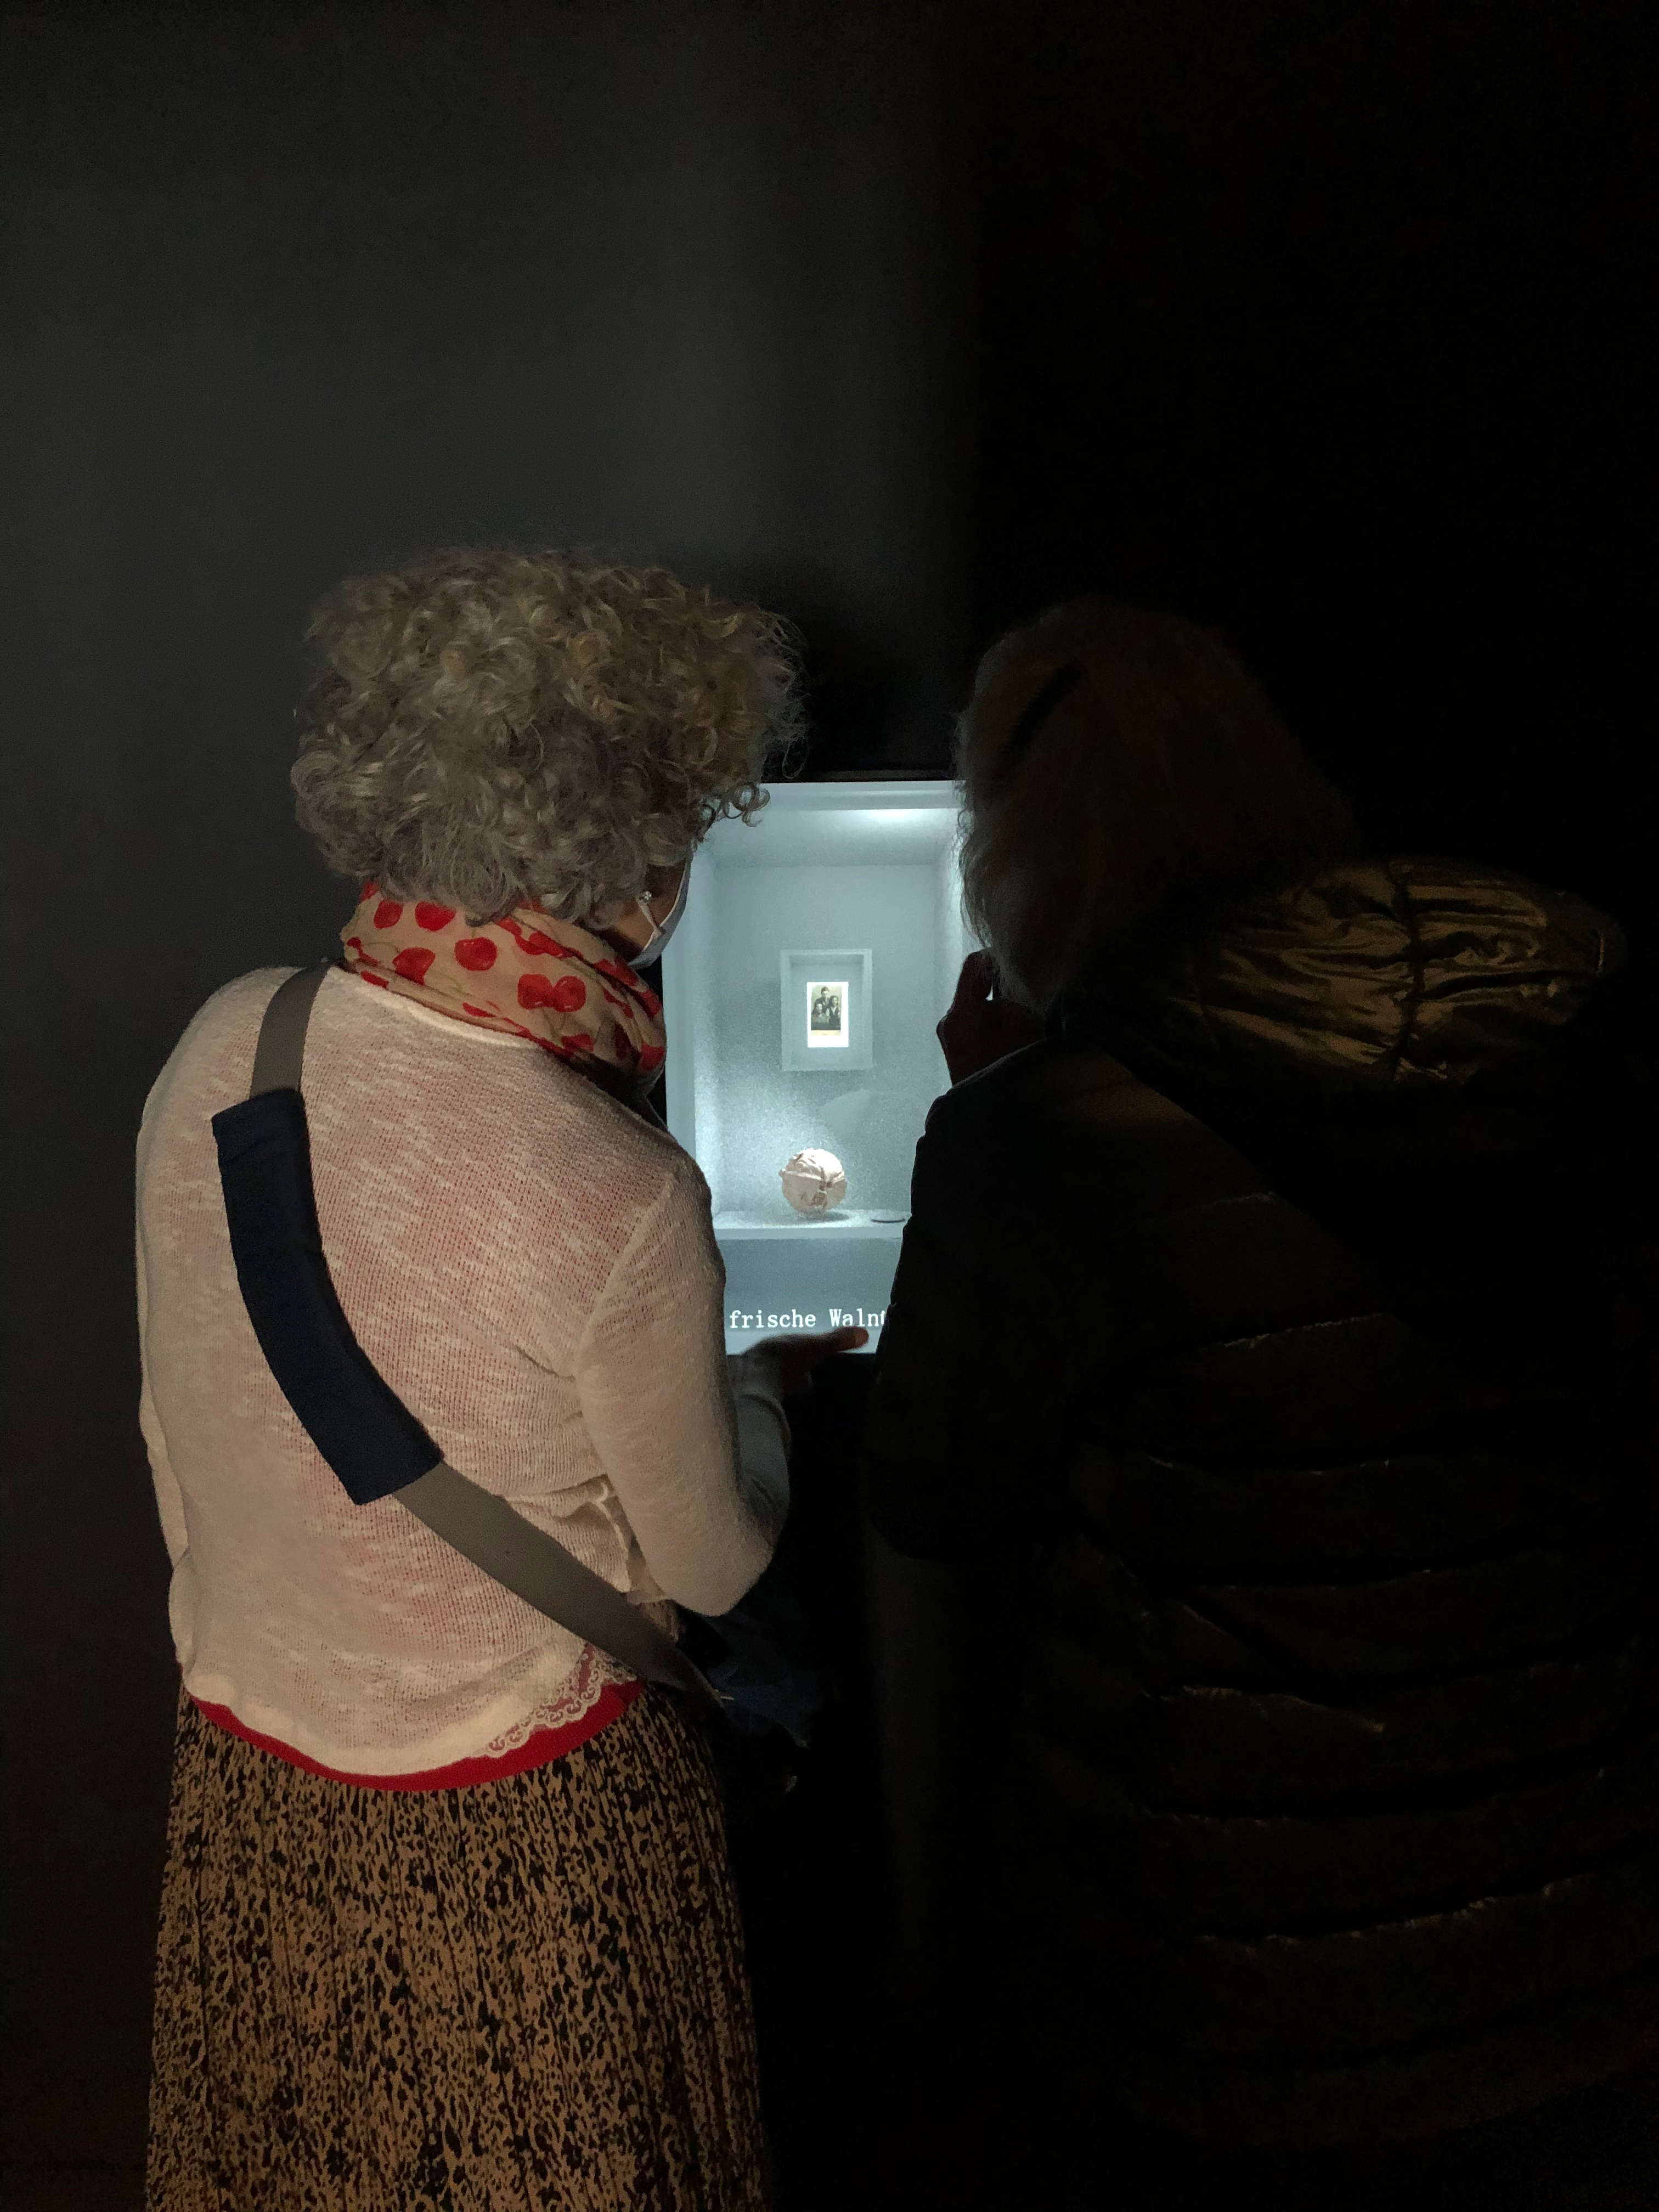 two visitors watch a video on a vertical screen